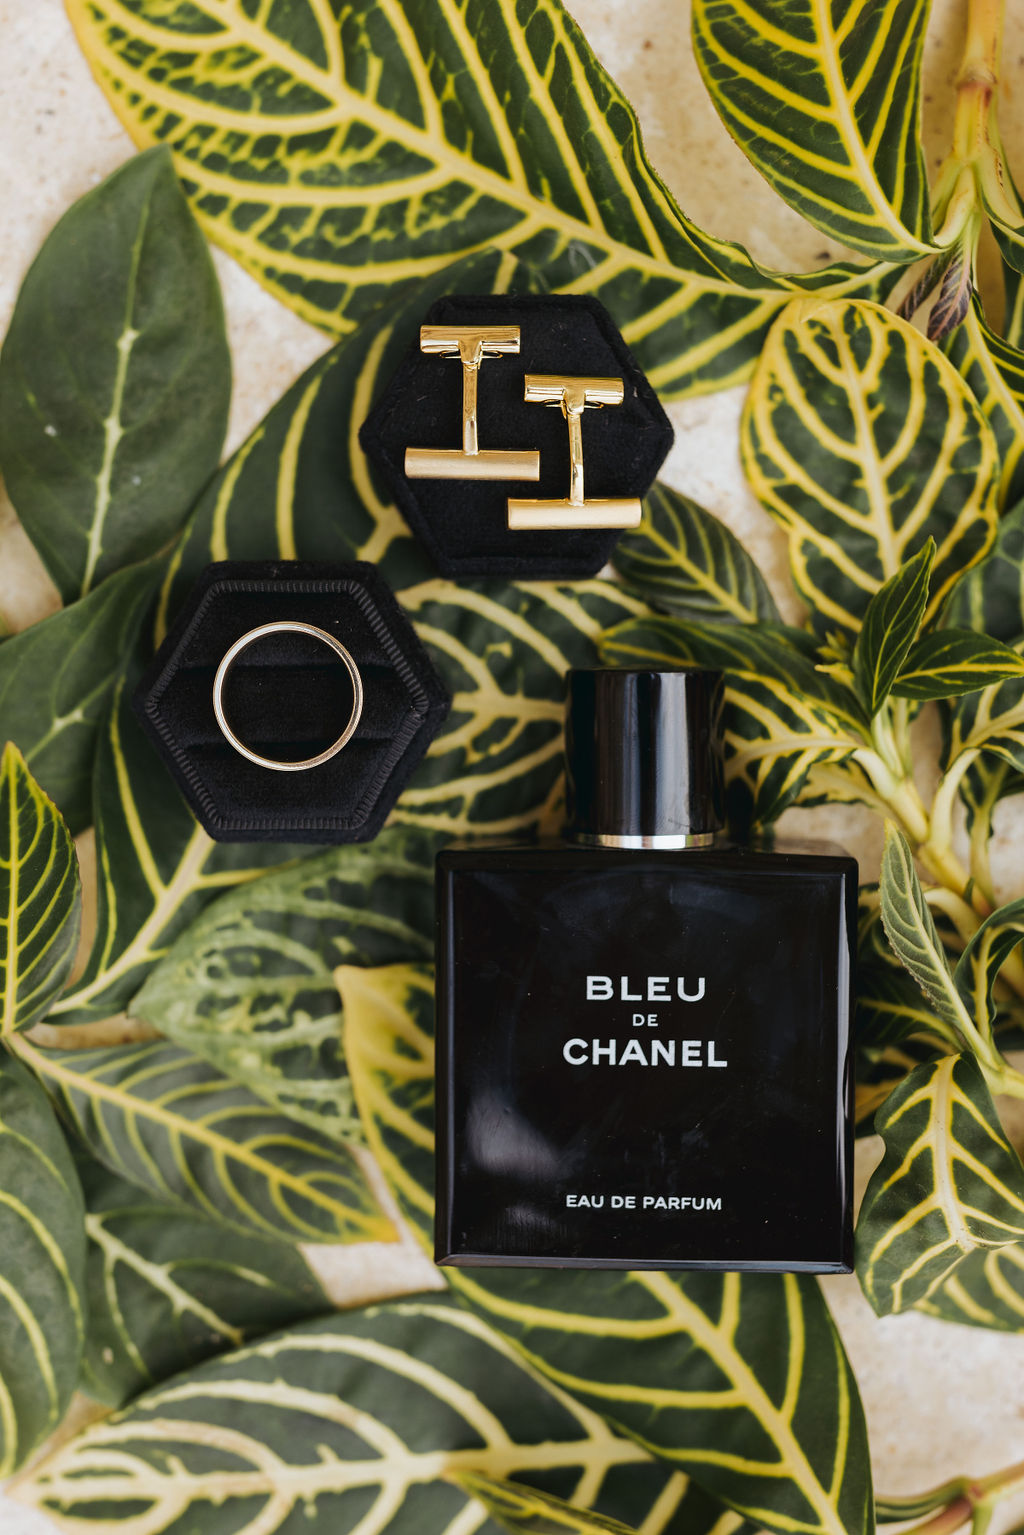 bleu de chanel wedding men's cologne with cuff links and wedding band